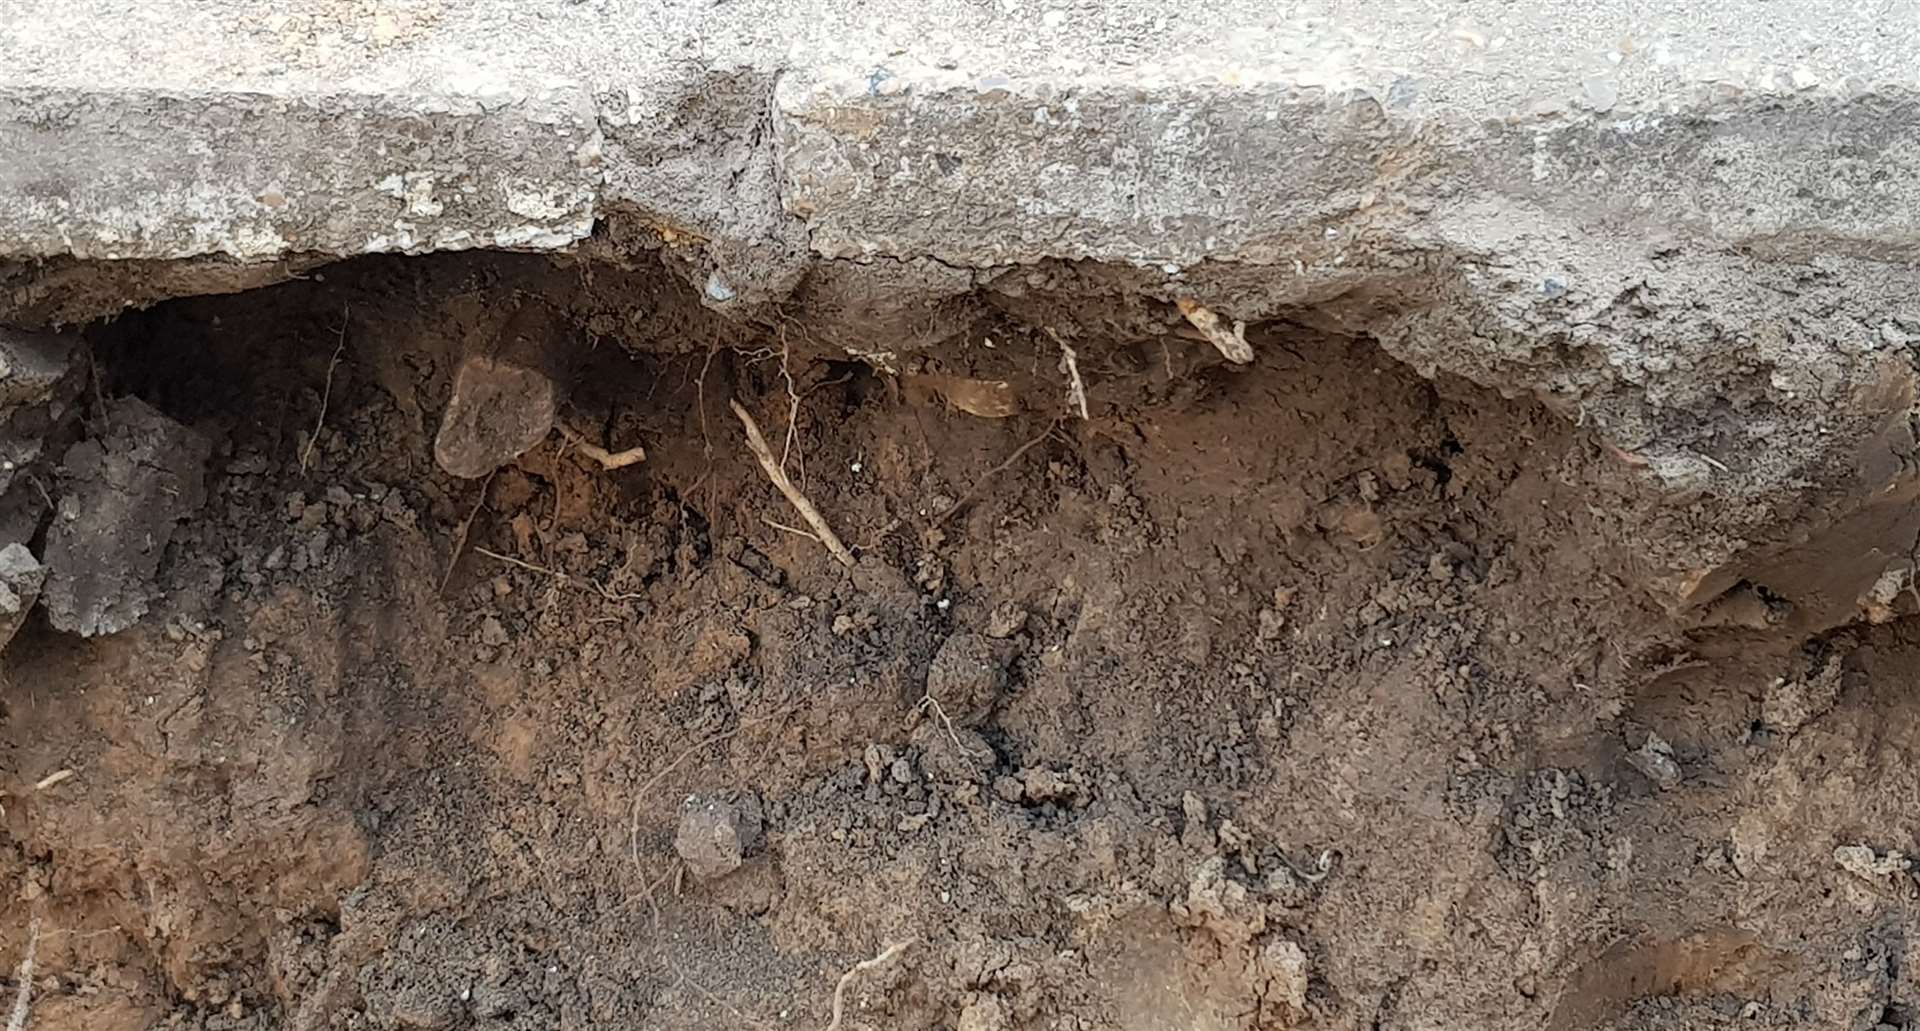 Bones from two skeletons were found at the property in Bridge Street